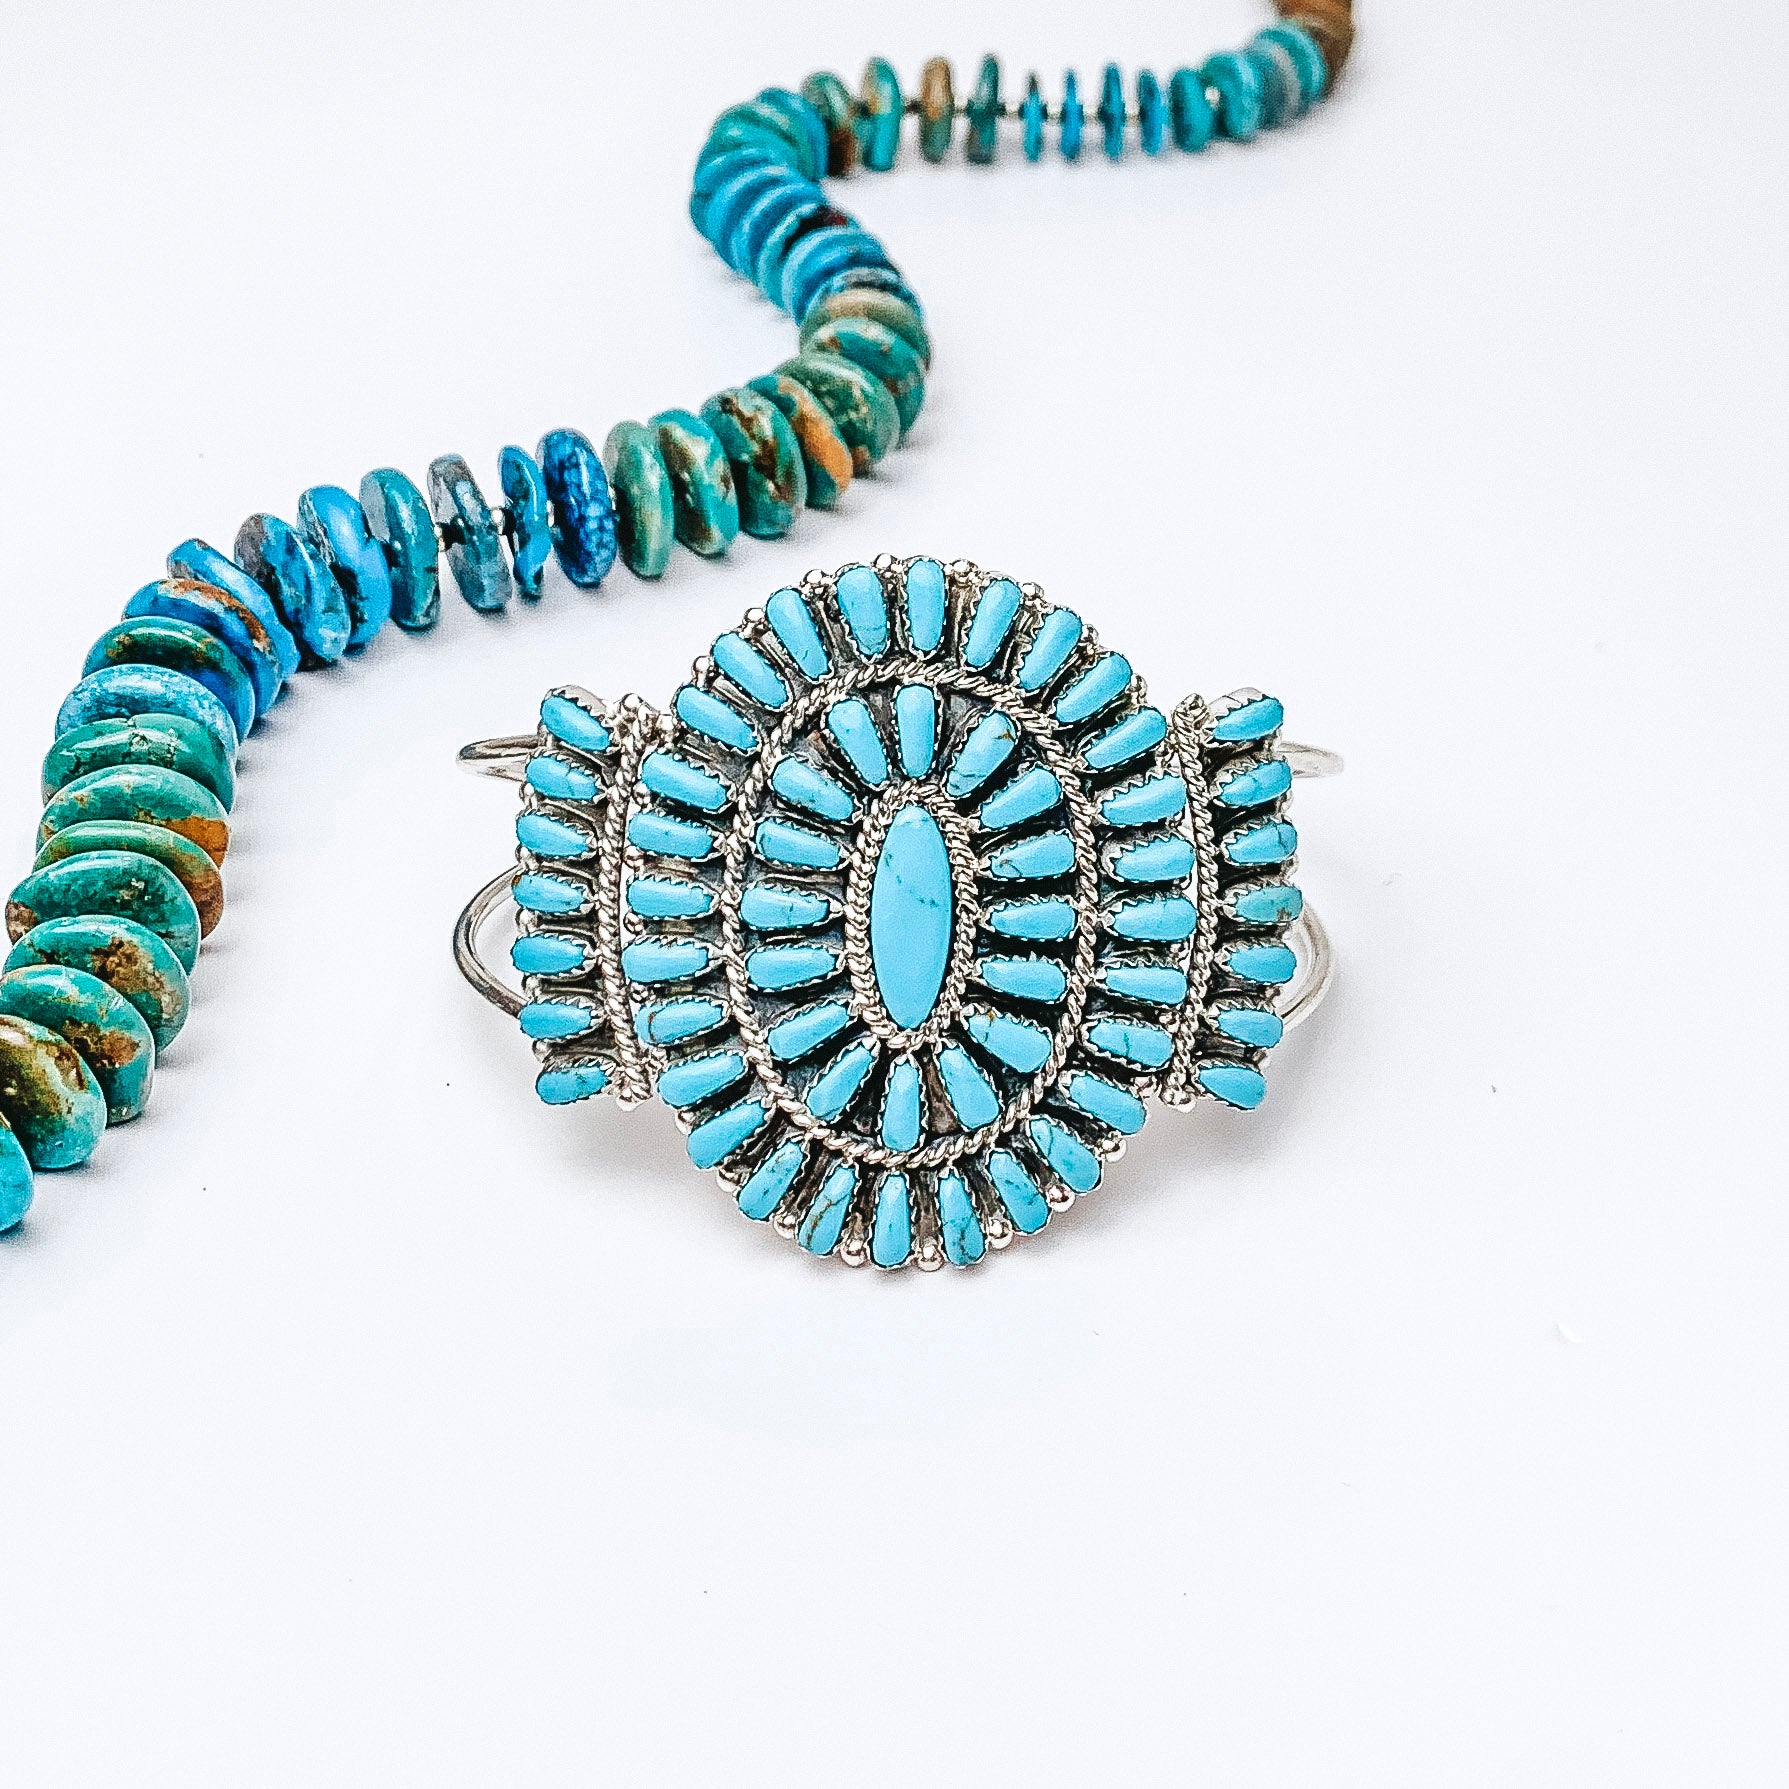 Centered in the picture is a turquoise cluster cuff with a turquoise necklace above the cuff. Background is all white.  